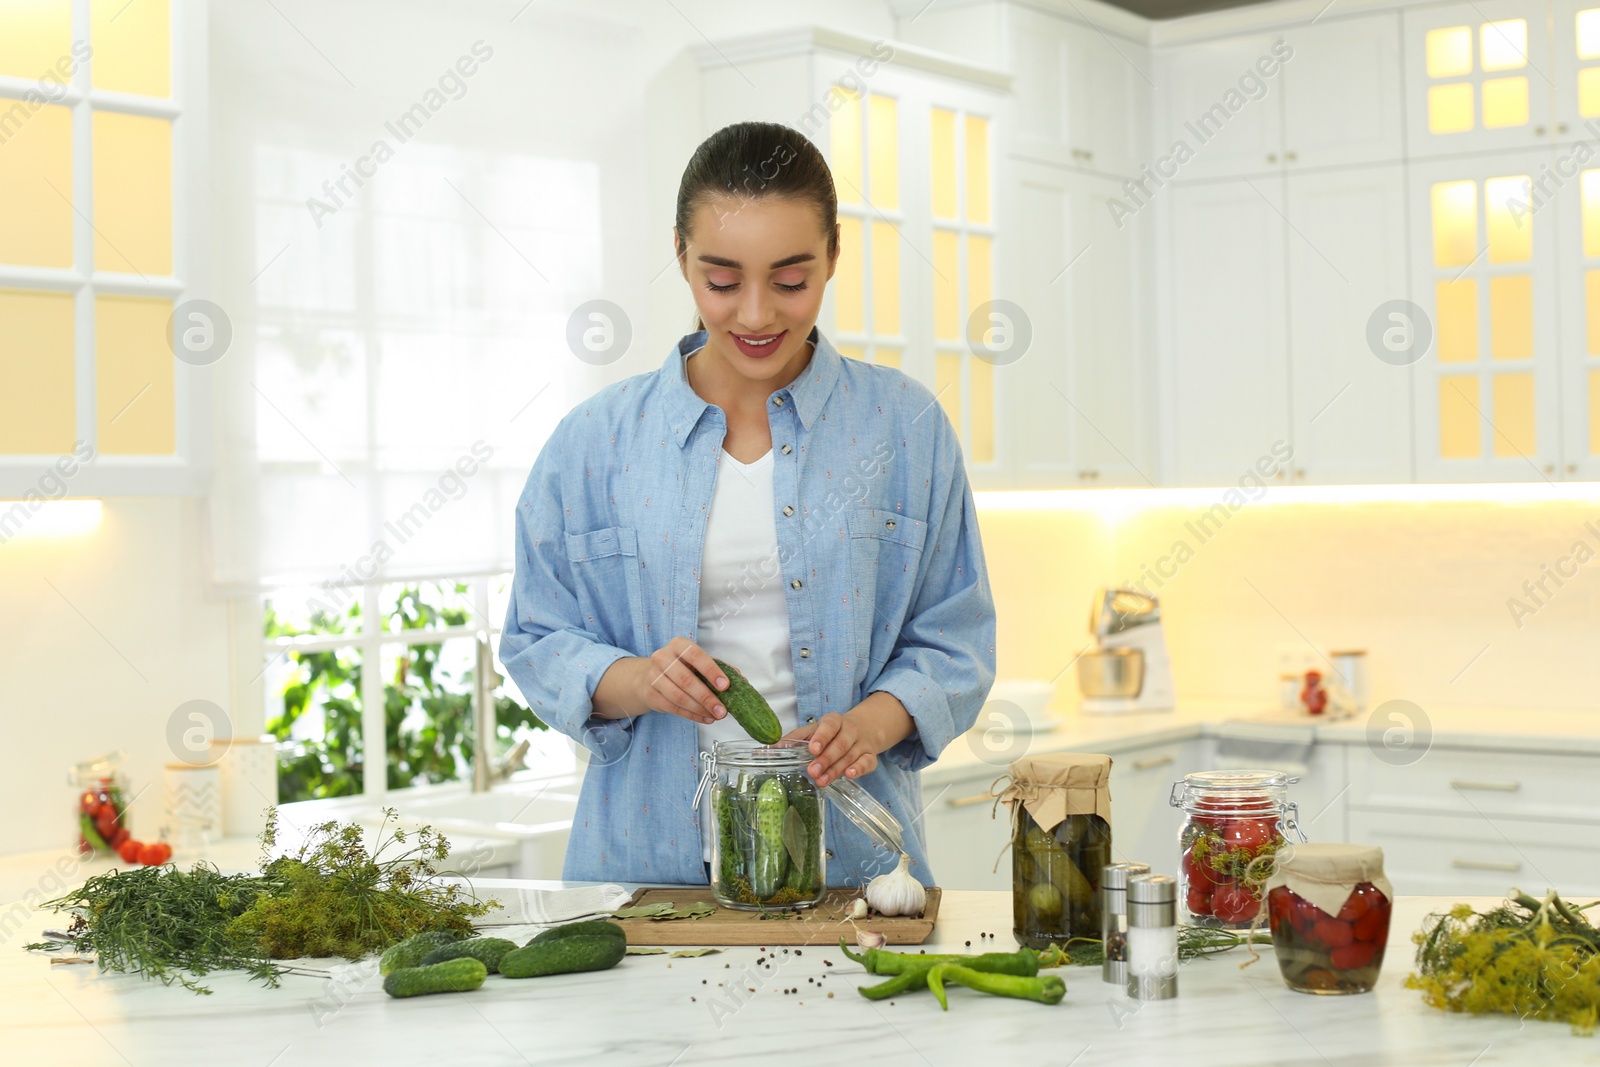 Photo of Woman putting cucumber into pickling jar at table in kitchen